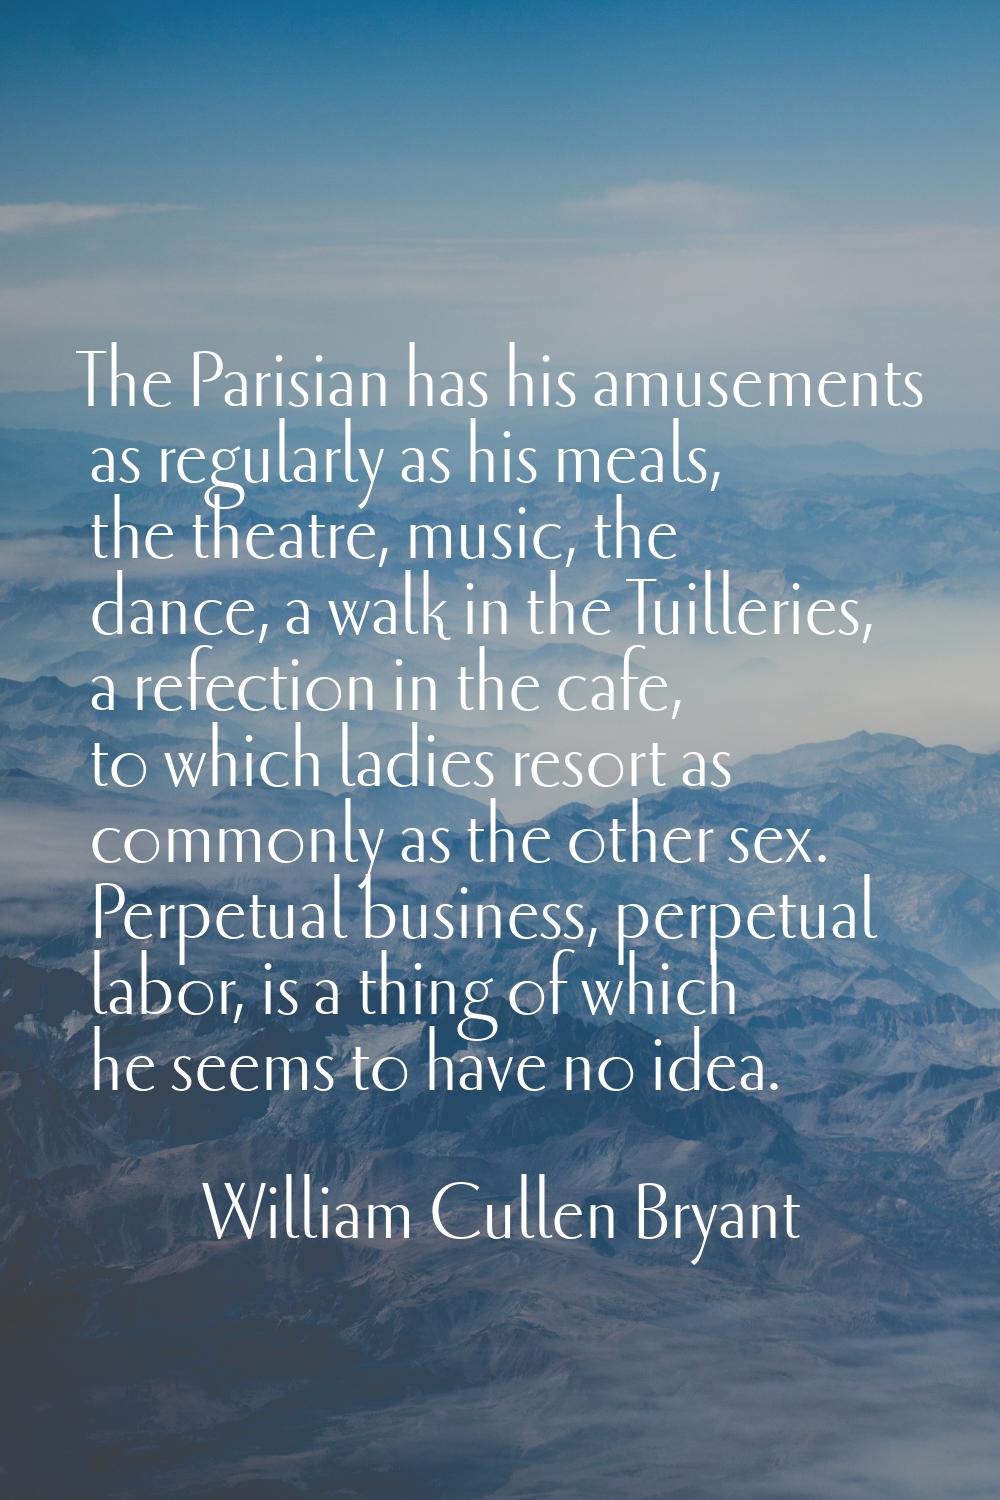 The Parisian has his amusements as regularly as his meals, the theatre, music, the dance, a walk in